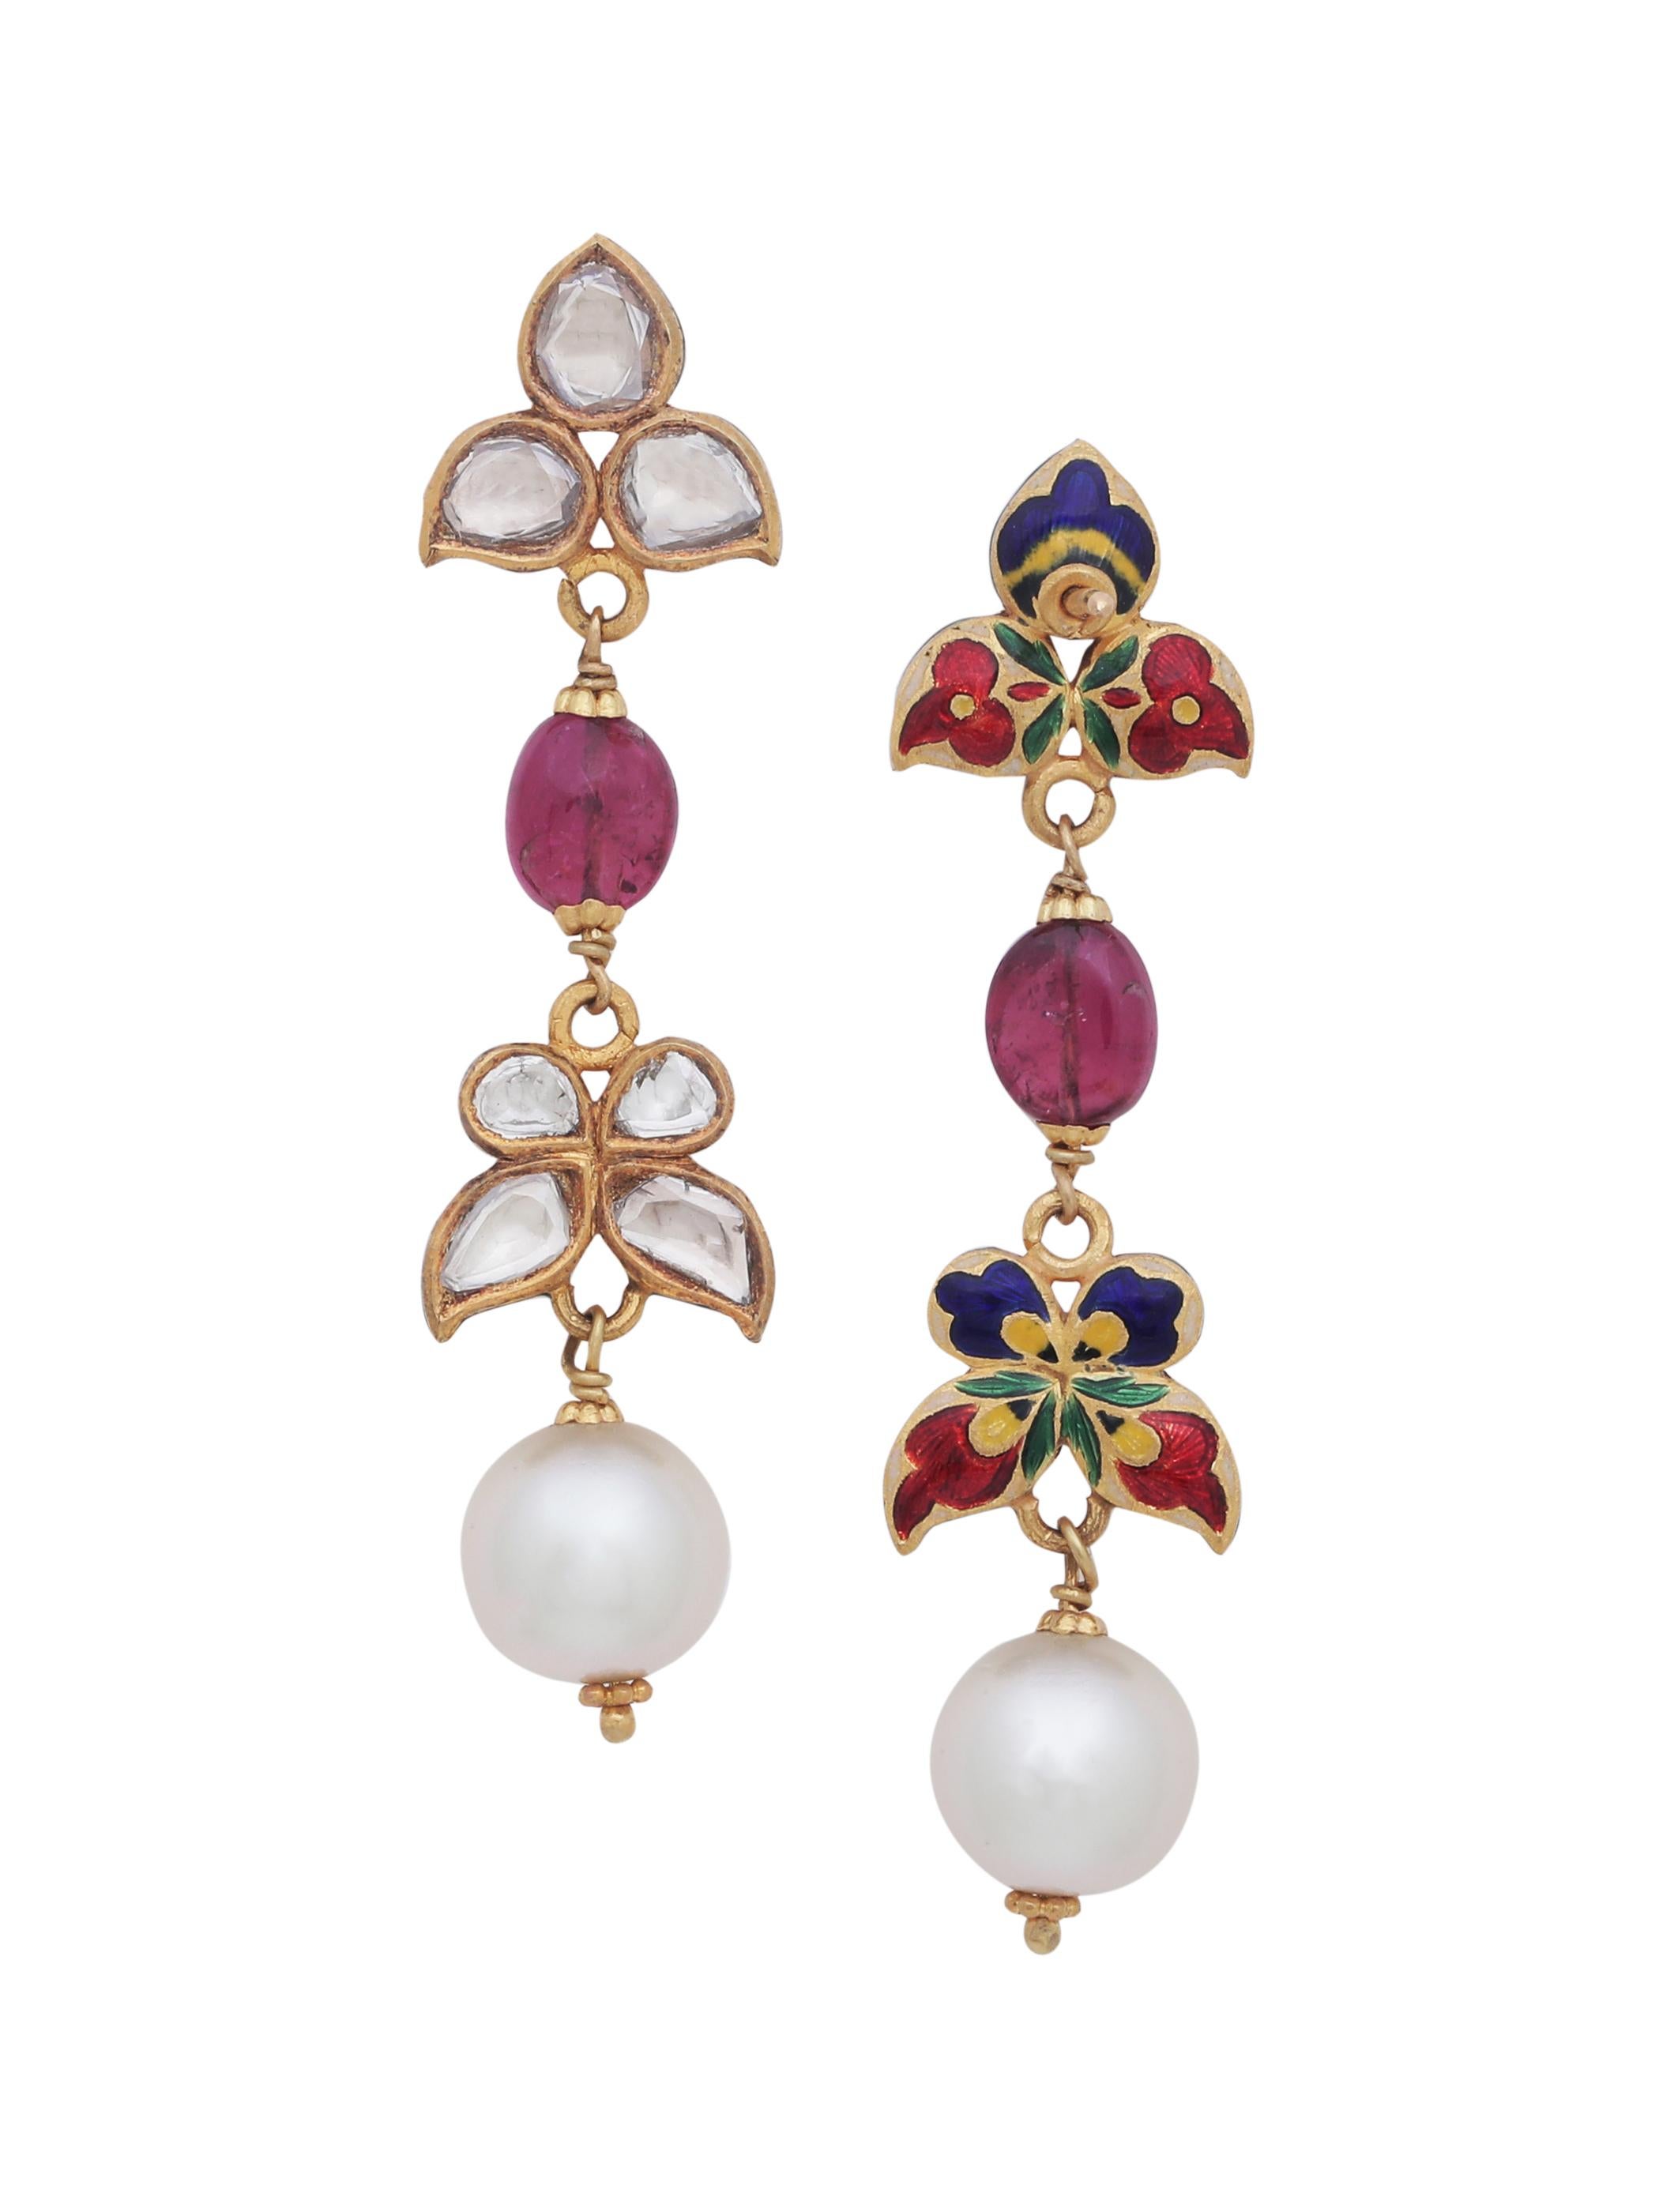 A pair of elegant earrings with flat uncut diamonds and a pair of fine tourmaline bead. The colour of tourmaline is referred to as Rubellite which is a super hot selling stone at the moment!
The piece is handcrafted in 18K Gold and has nice enamel